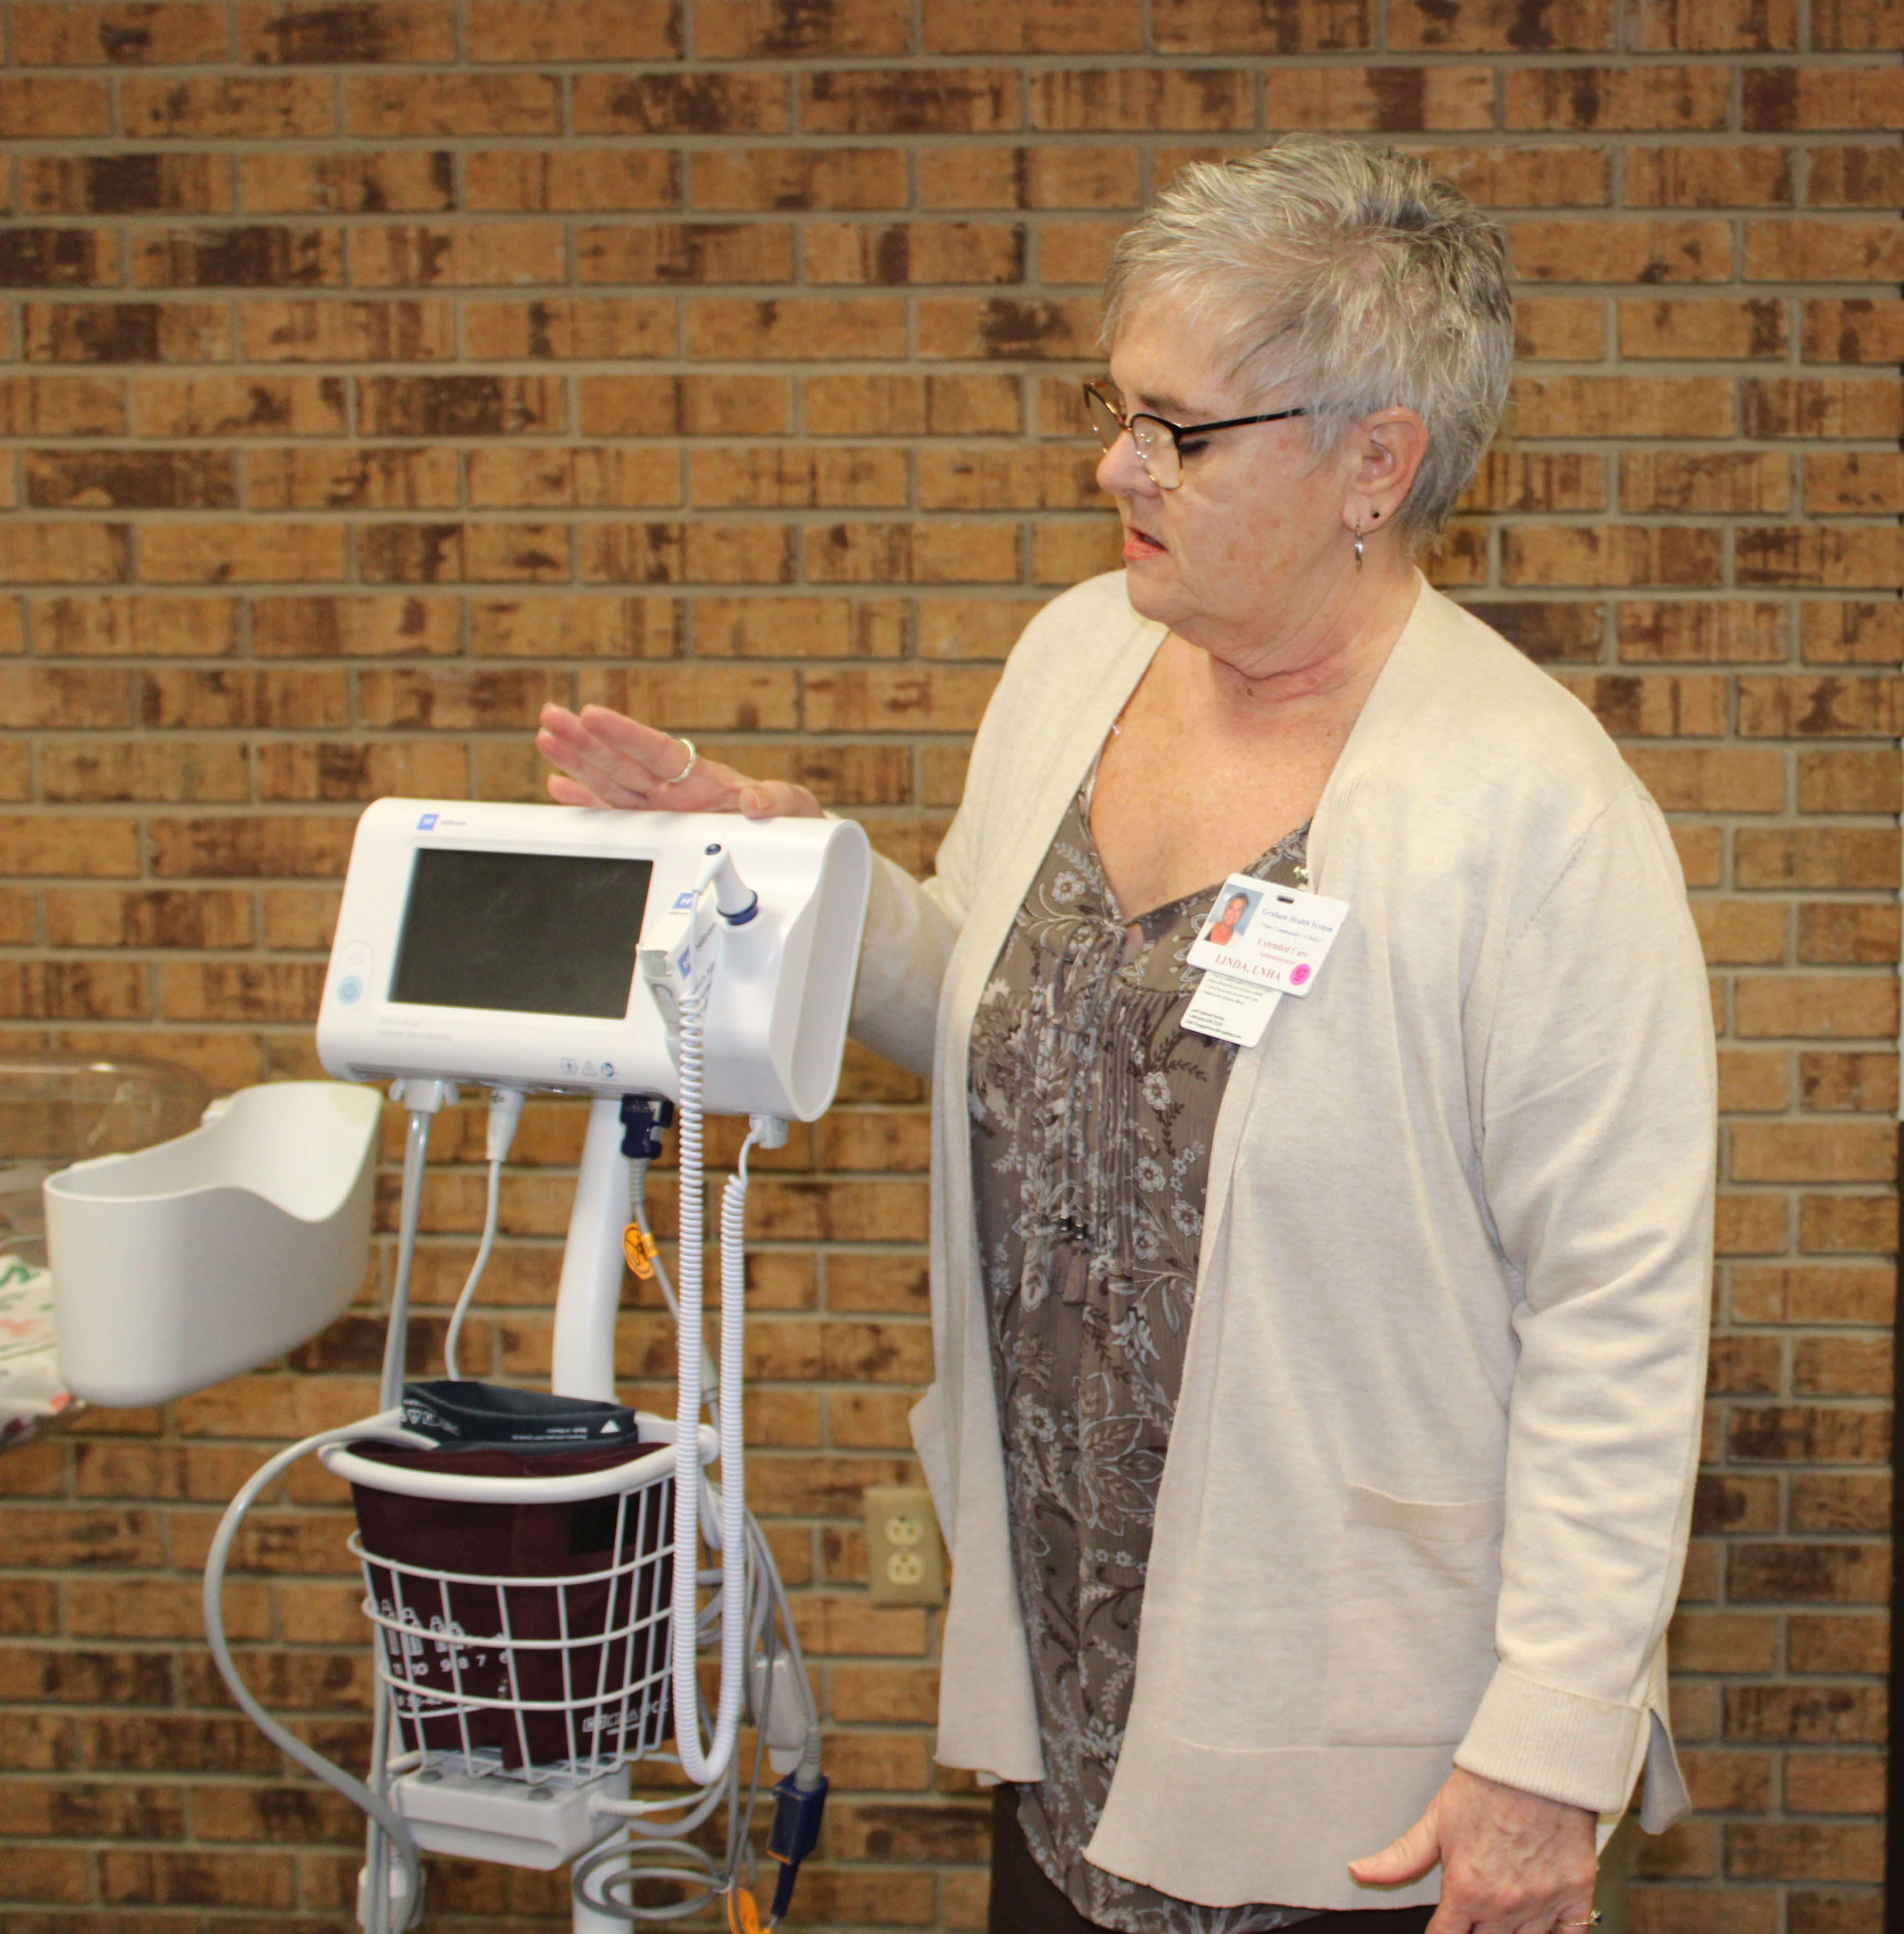 Linda Patton Walnut Street Terrace Nursing Home Administrator with the Welch Allyn Connex Spot Monitors